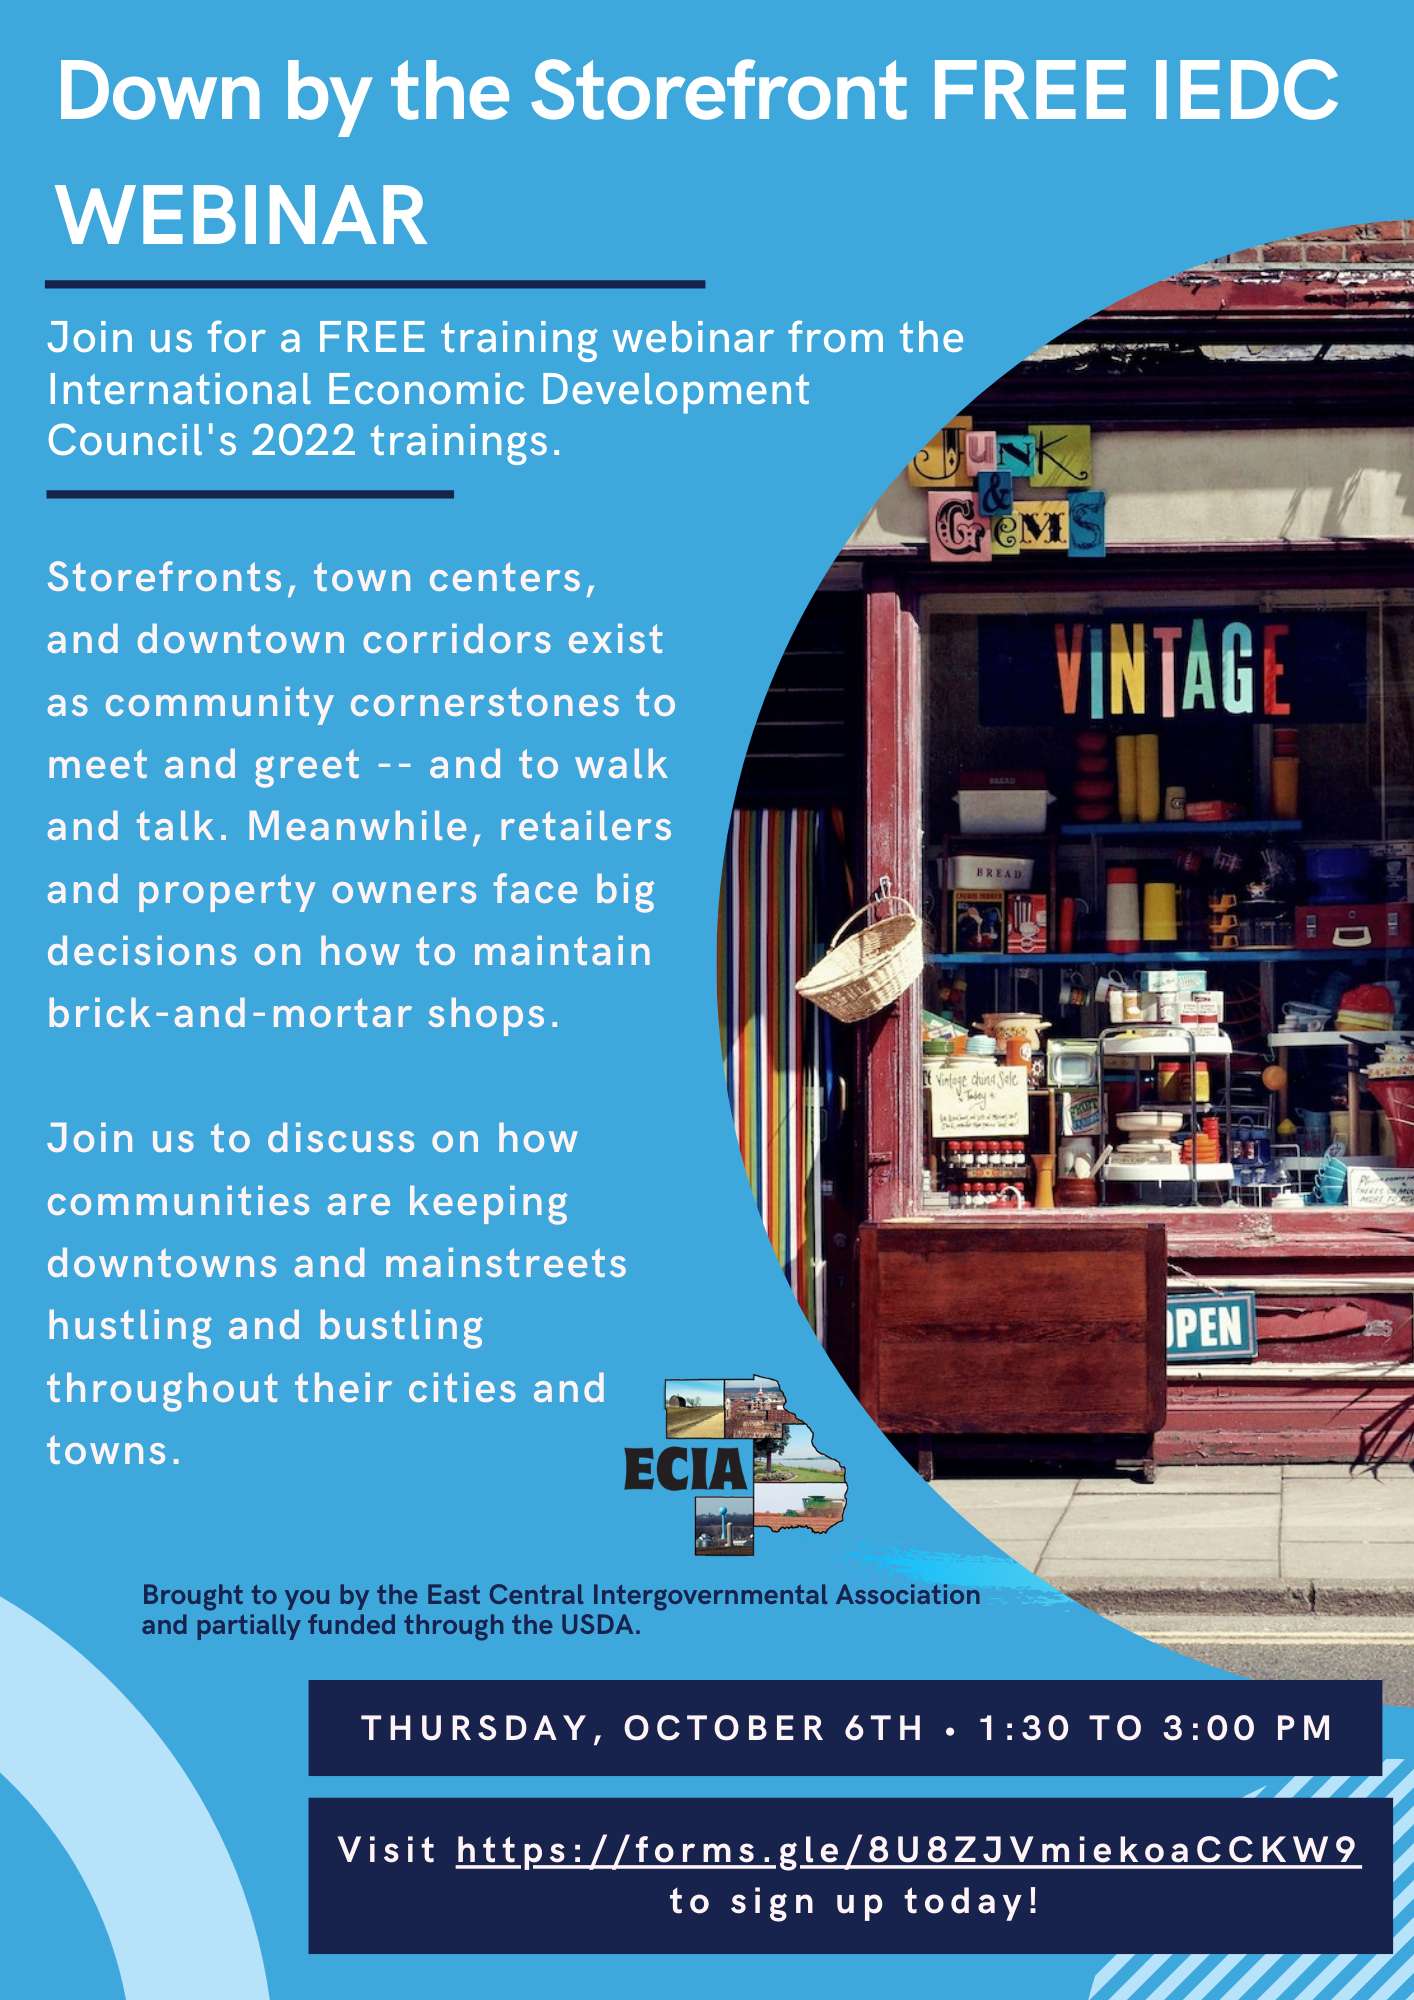 10-06-22  Down by the Storefront IEDC Webinar Flyer - Copy